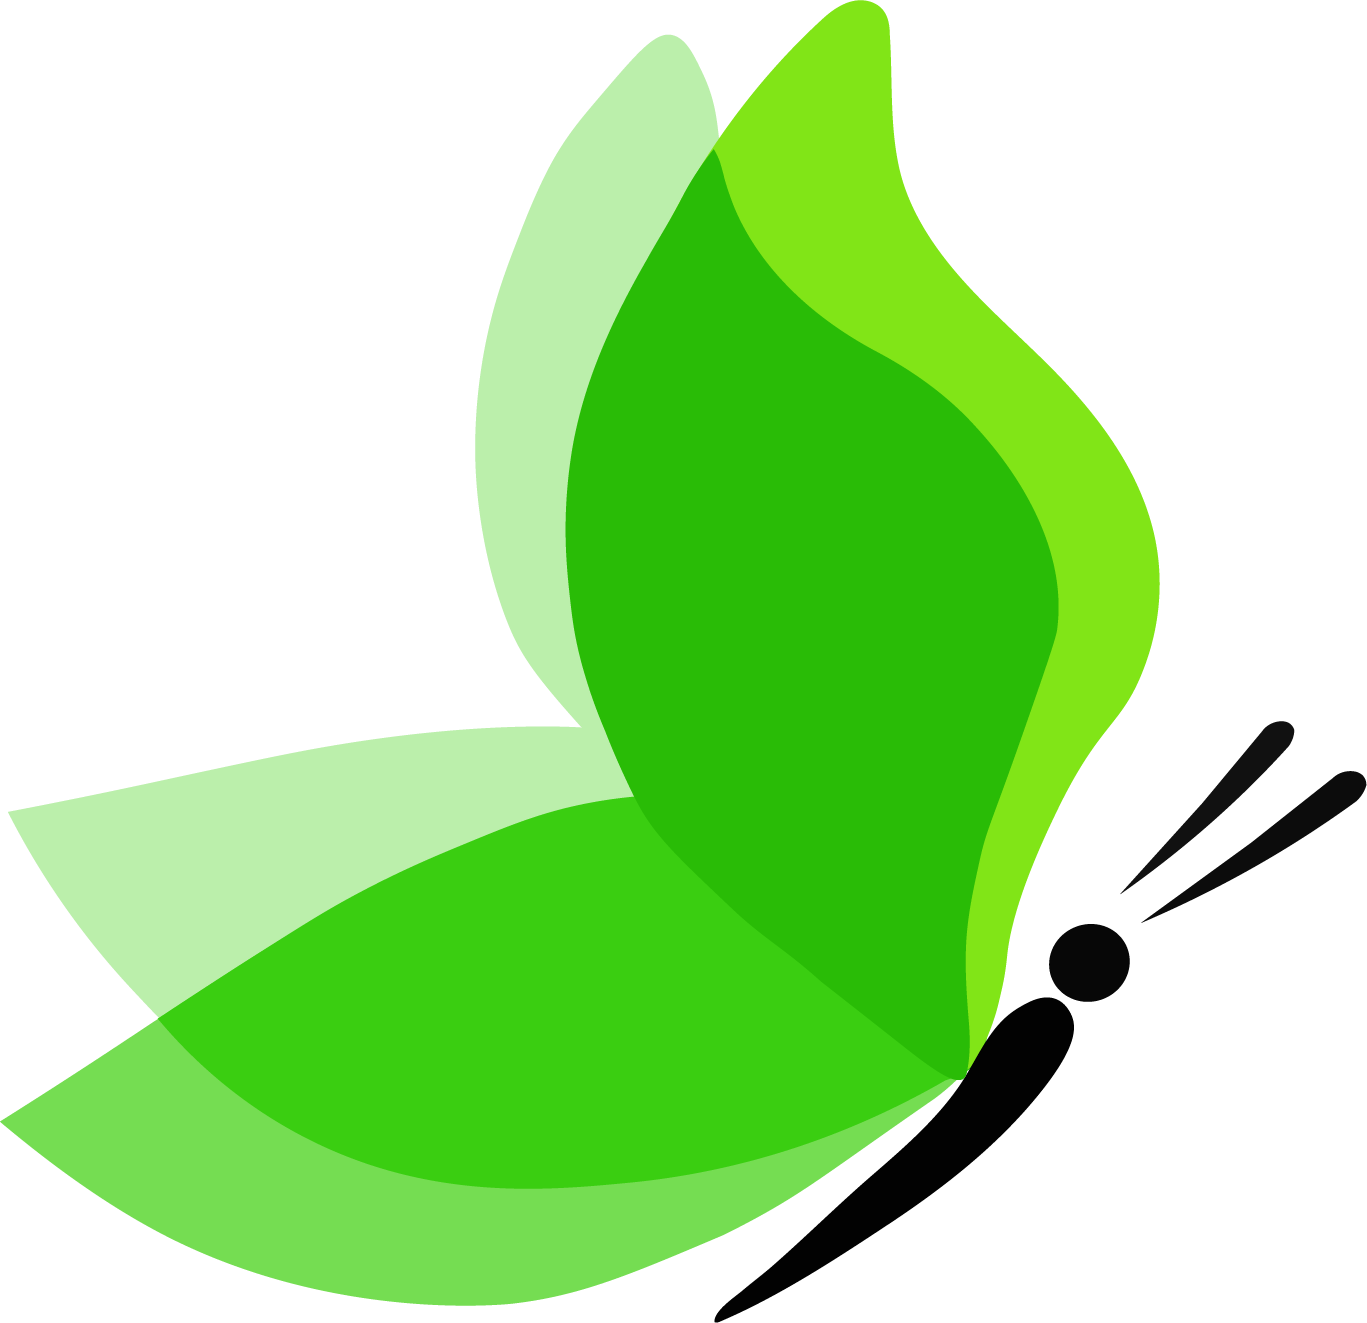 Langtrees_green_butterfly_logo.png